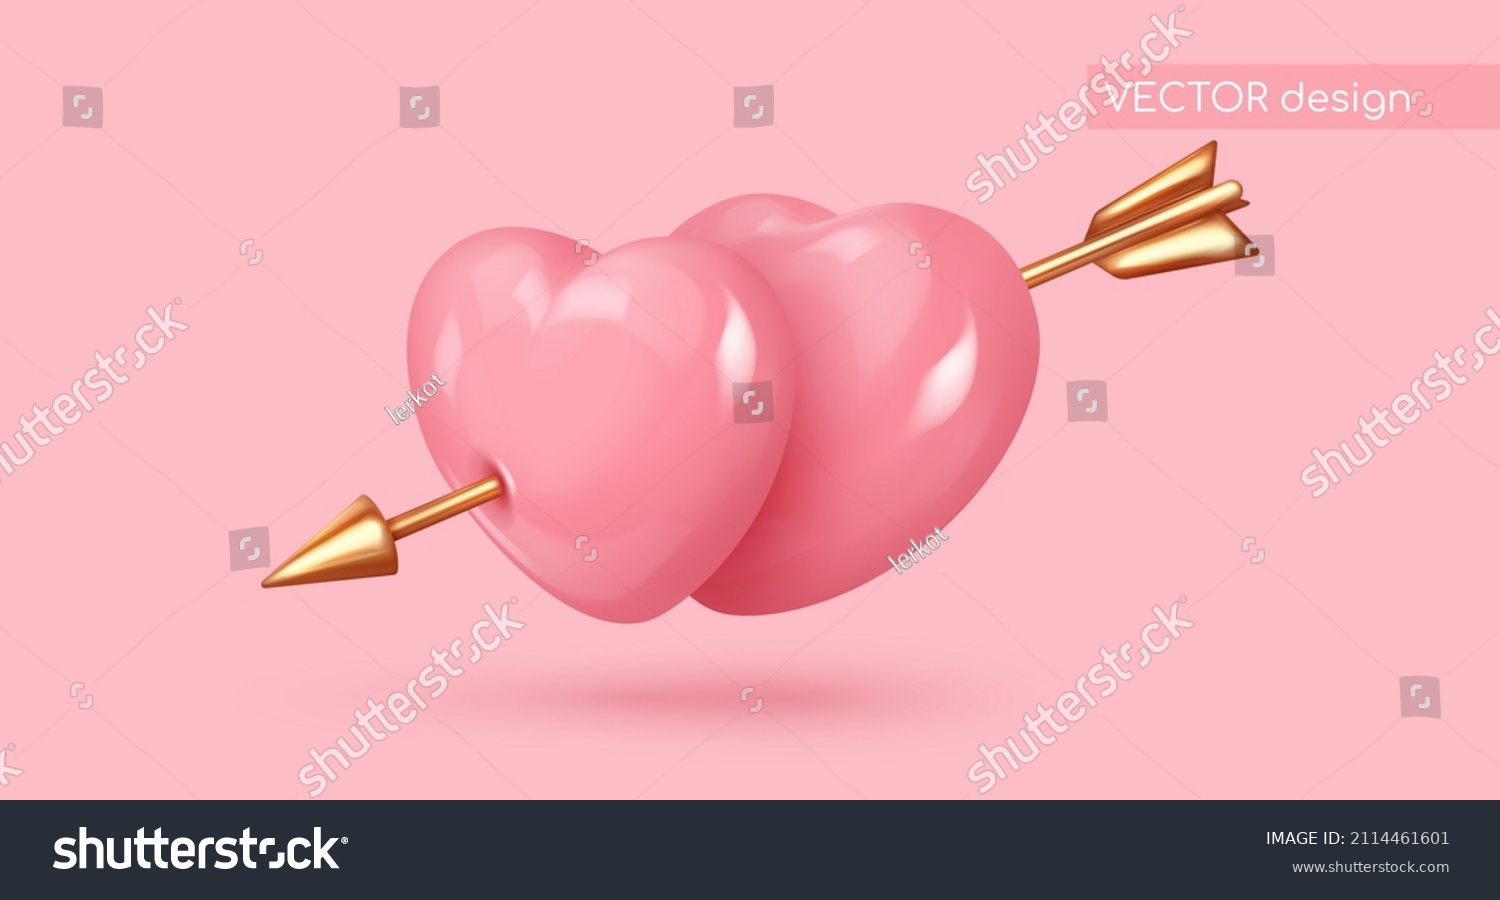 SVG of Couple realistic pink glossy candy hearts with golden arrow. Look like 3d. Symbol of love. Be my Valentine. Vector illustration for card, party, design, flyer, poster, decor, banner, web, advertising. svg